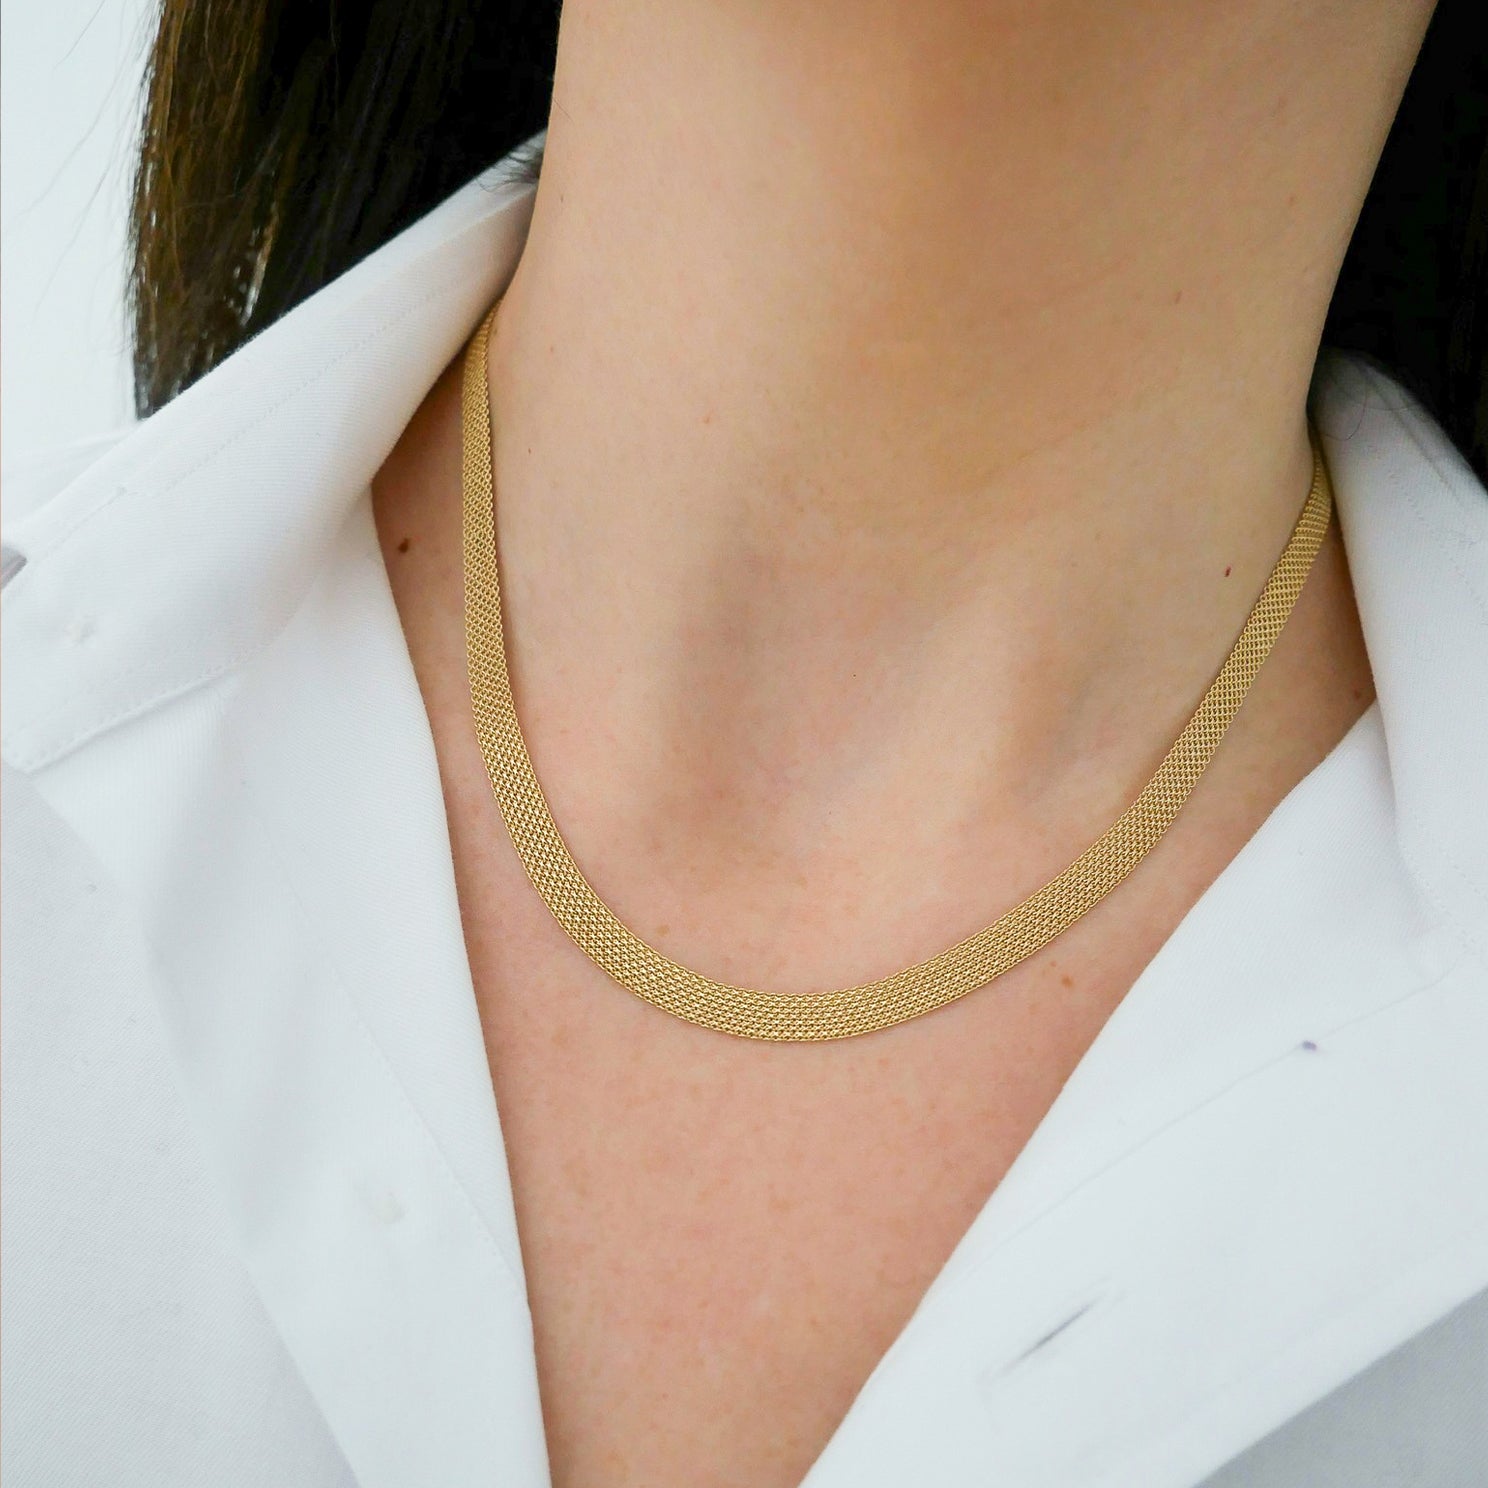 Gold Mesh Necklace 14K Yellow Gold